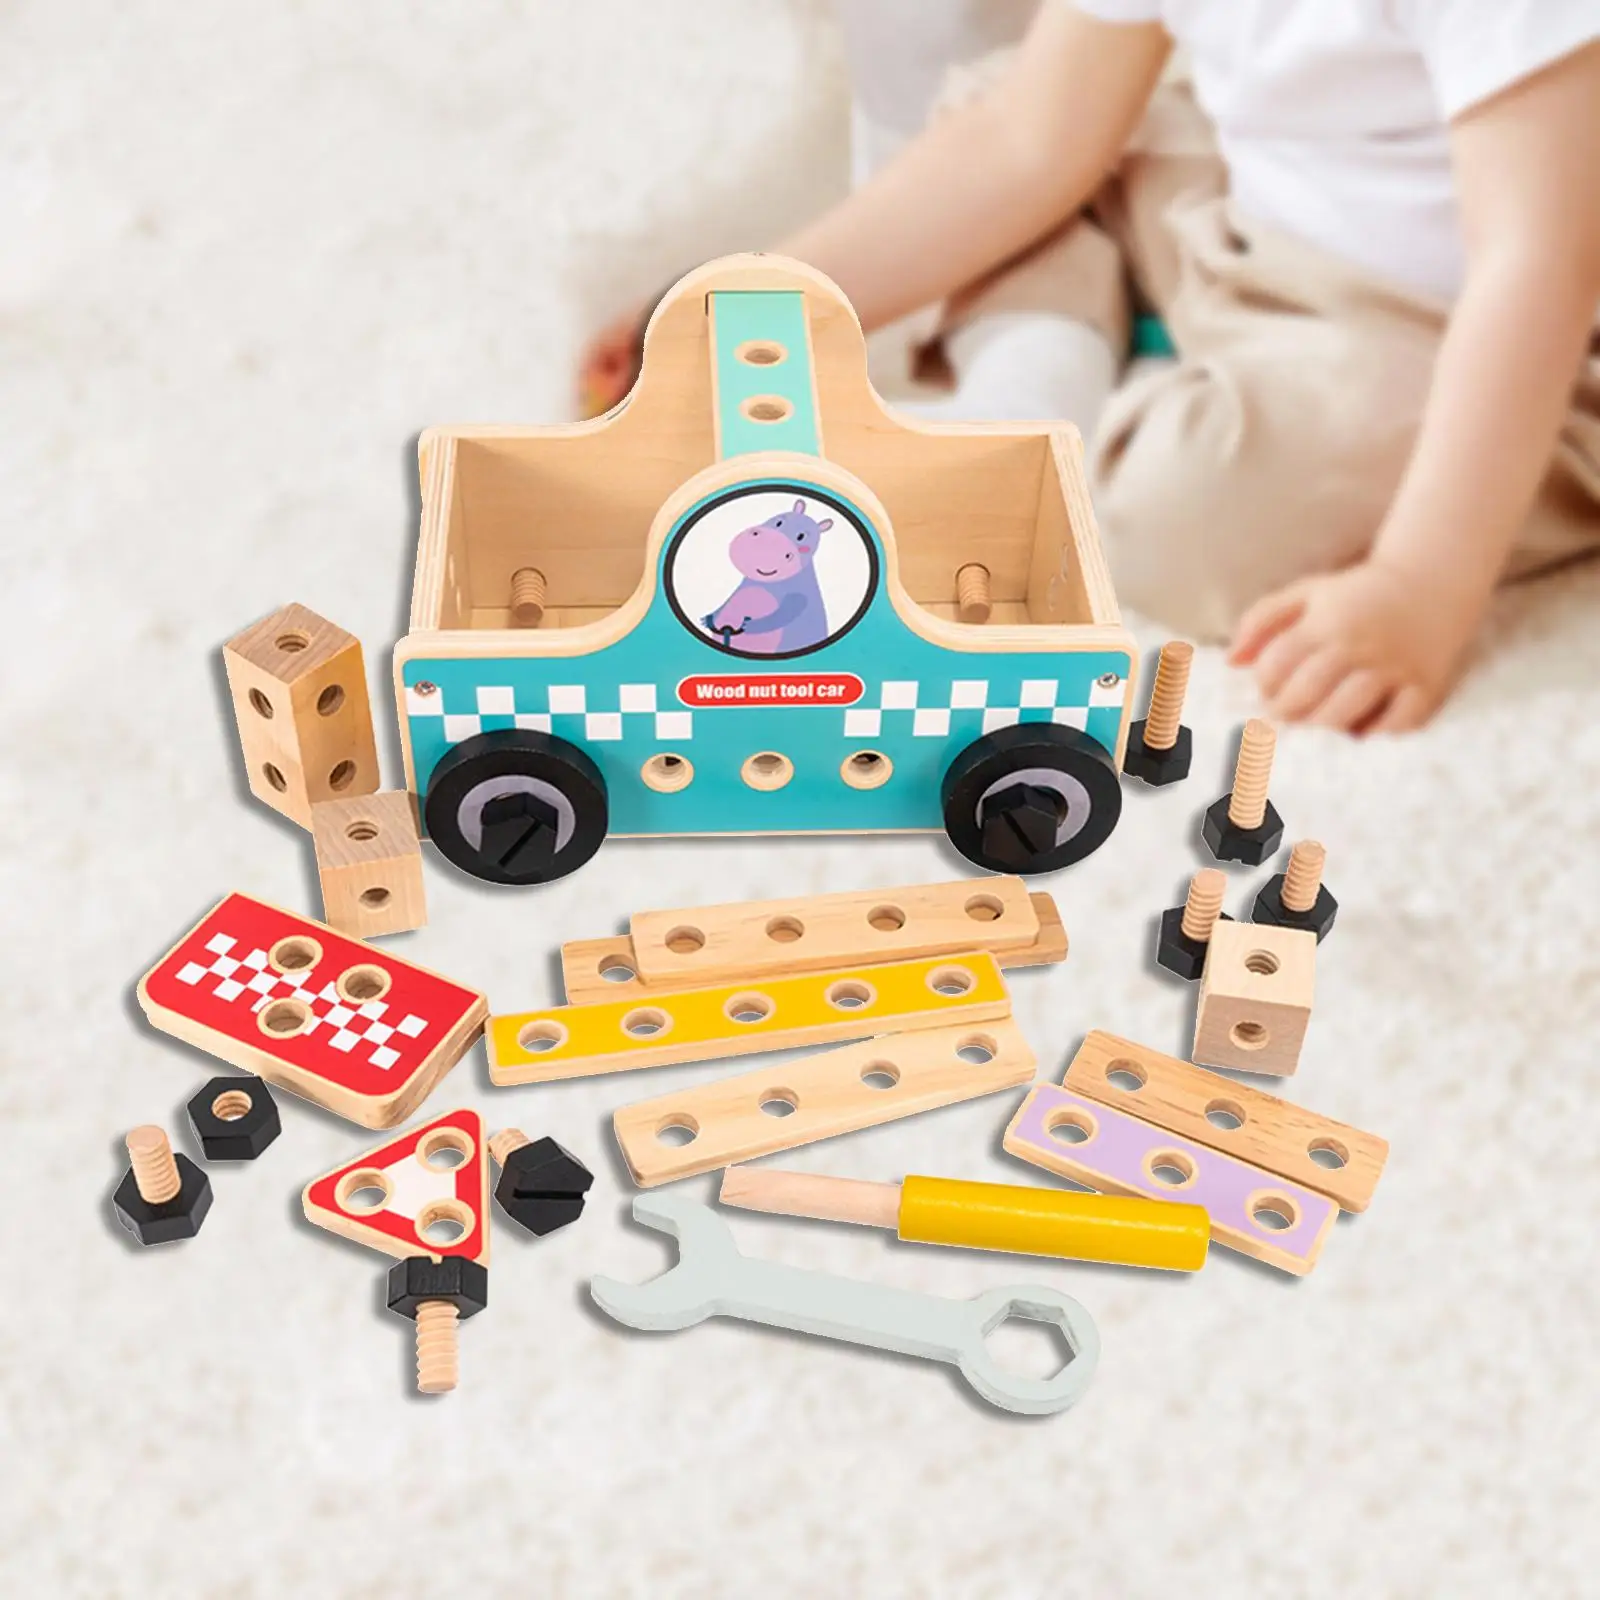 Wooden Repair Tool Box Montessori Tool Set Wooden Tool Basket Toy Wooden Building Set for Children Toddler Boys Girls Ages 3-6